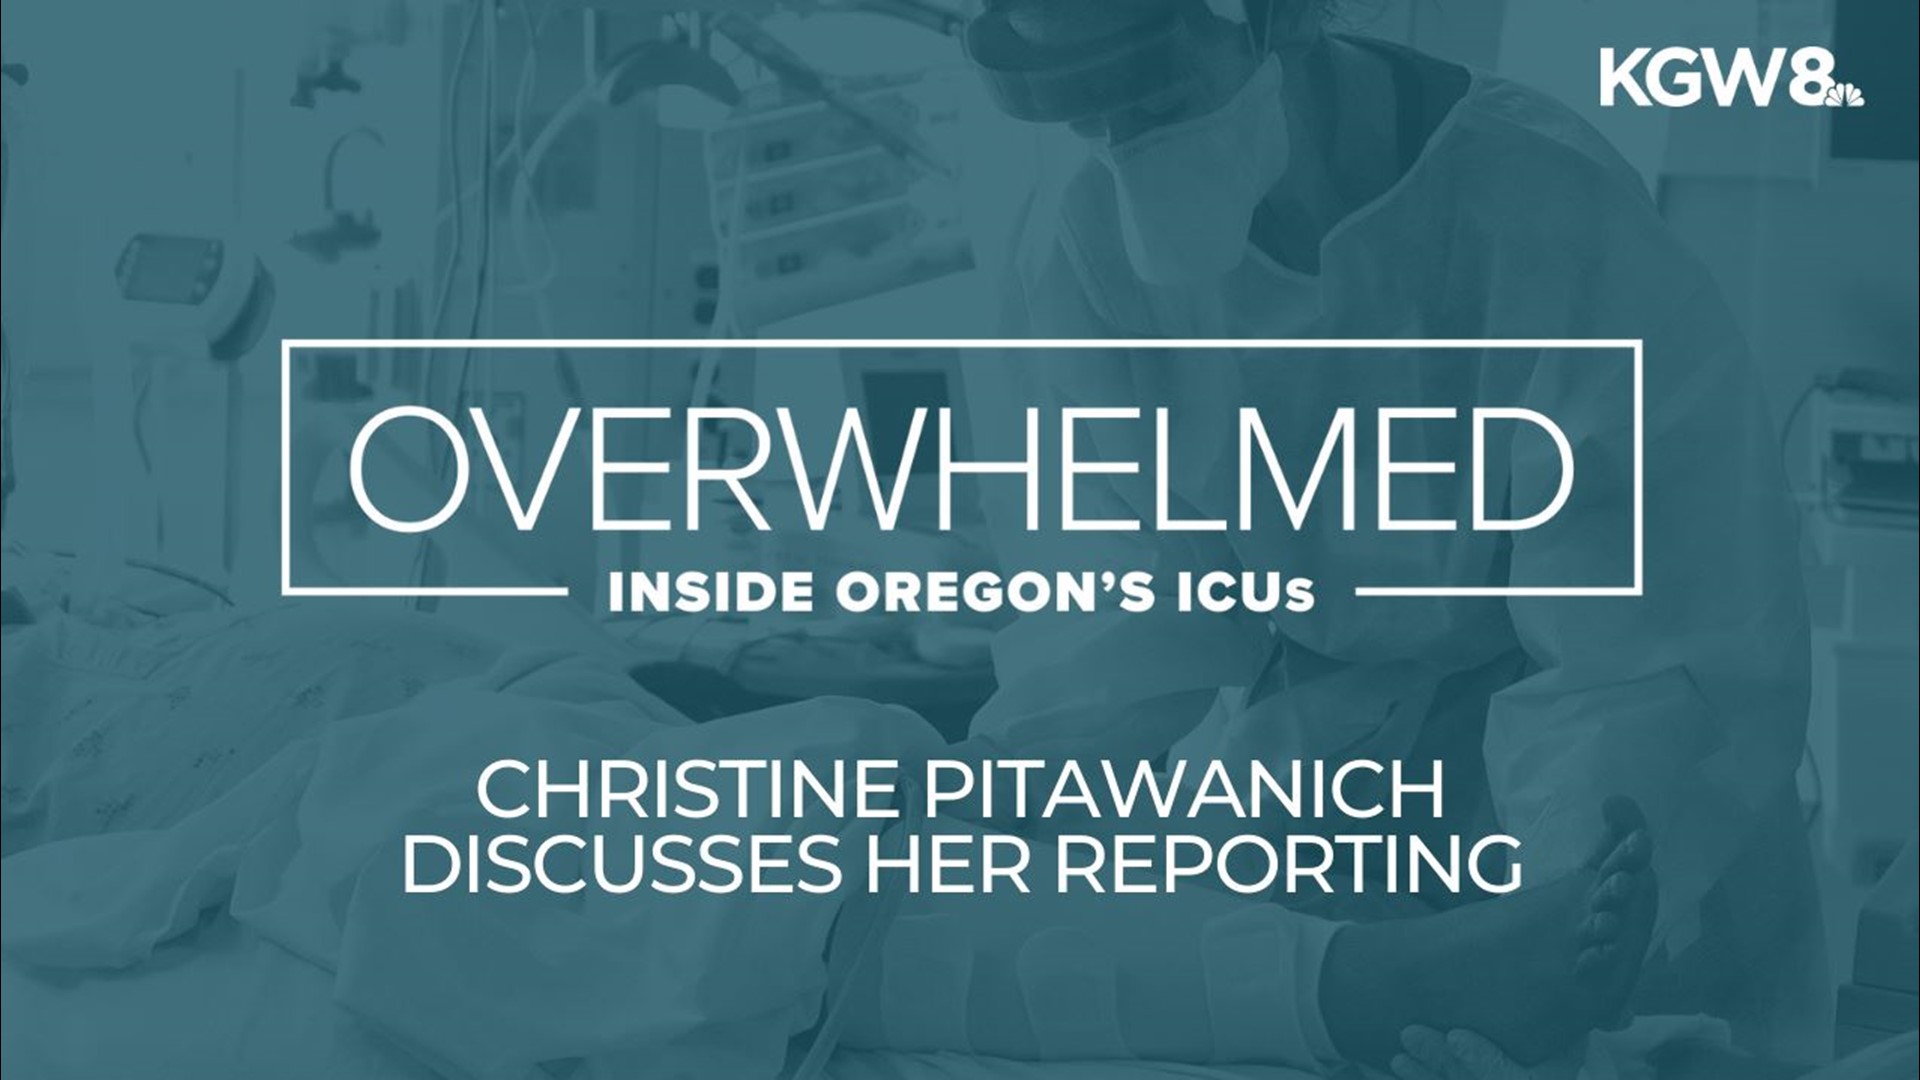 KGW reporter Christine Pitawanich recently visited the front lines of the fight against COVID. She discussed her experience inside the ICU at OHSU in Portland.